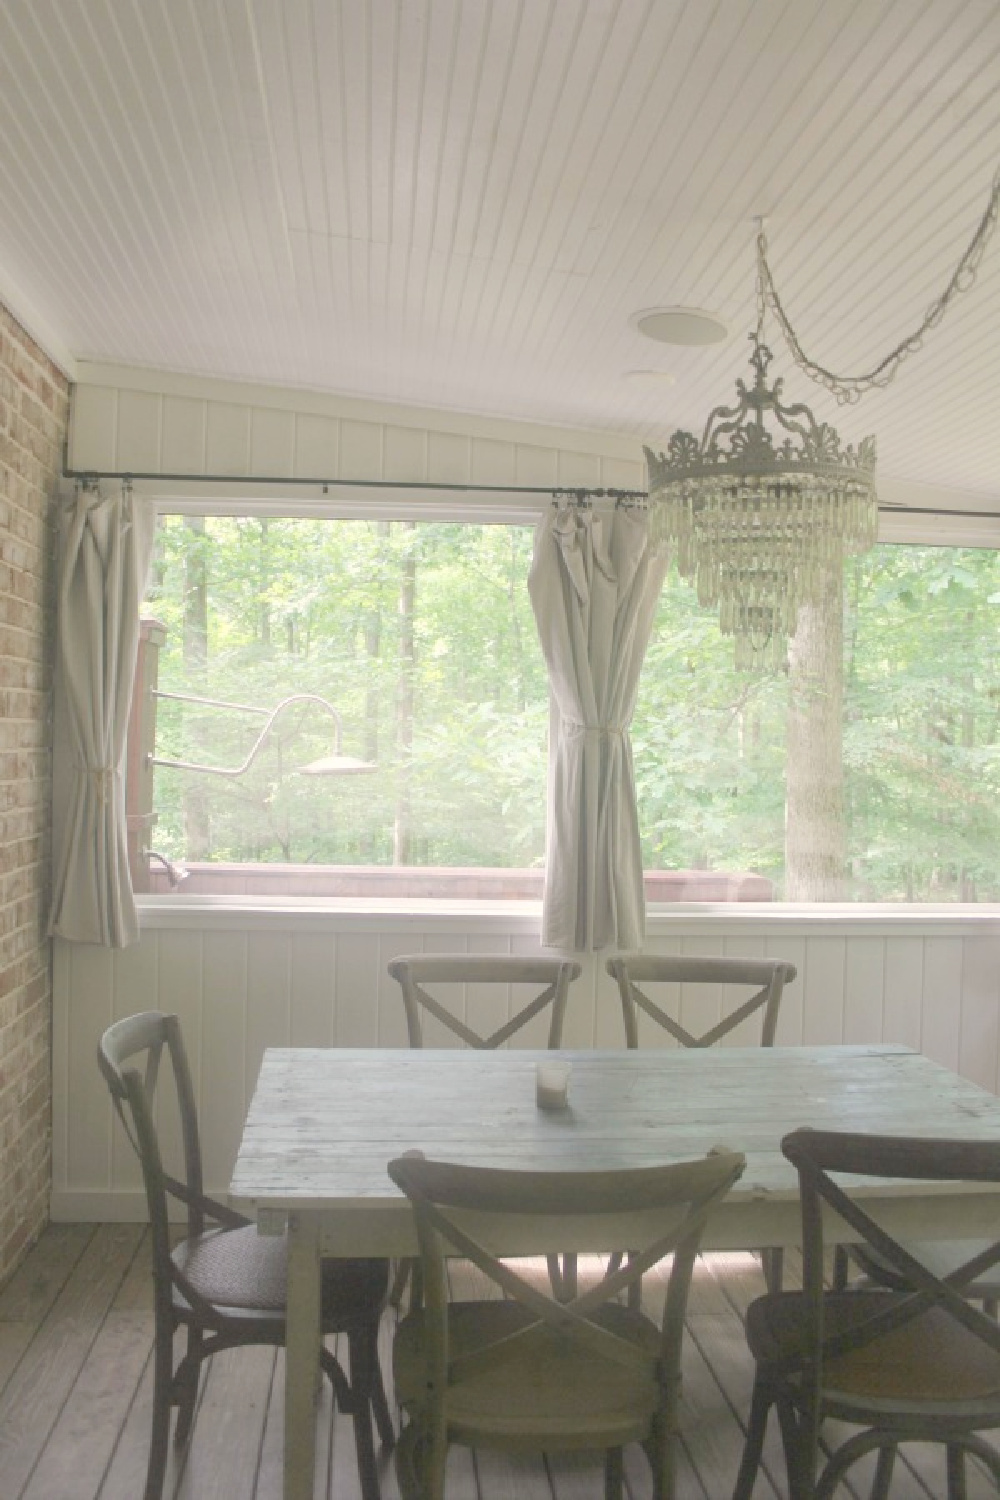 Screen porch dining area at rustic country cottage in Leiper's Fork, TN known as storybook cottage - Hello Lovely Studio.